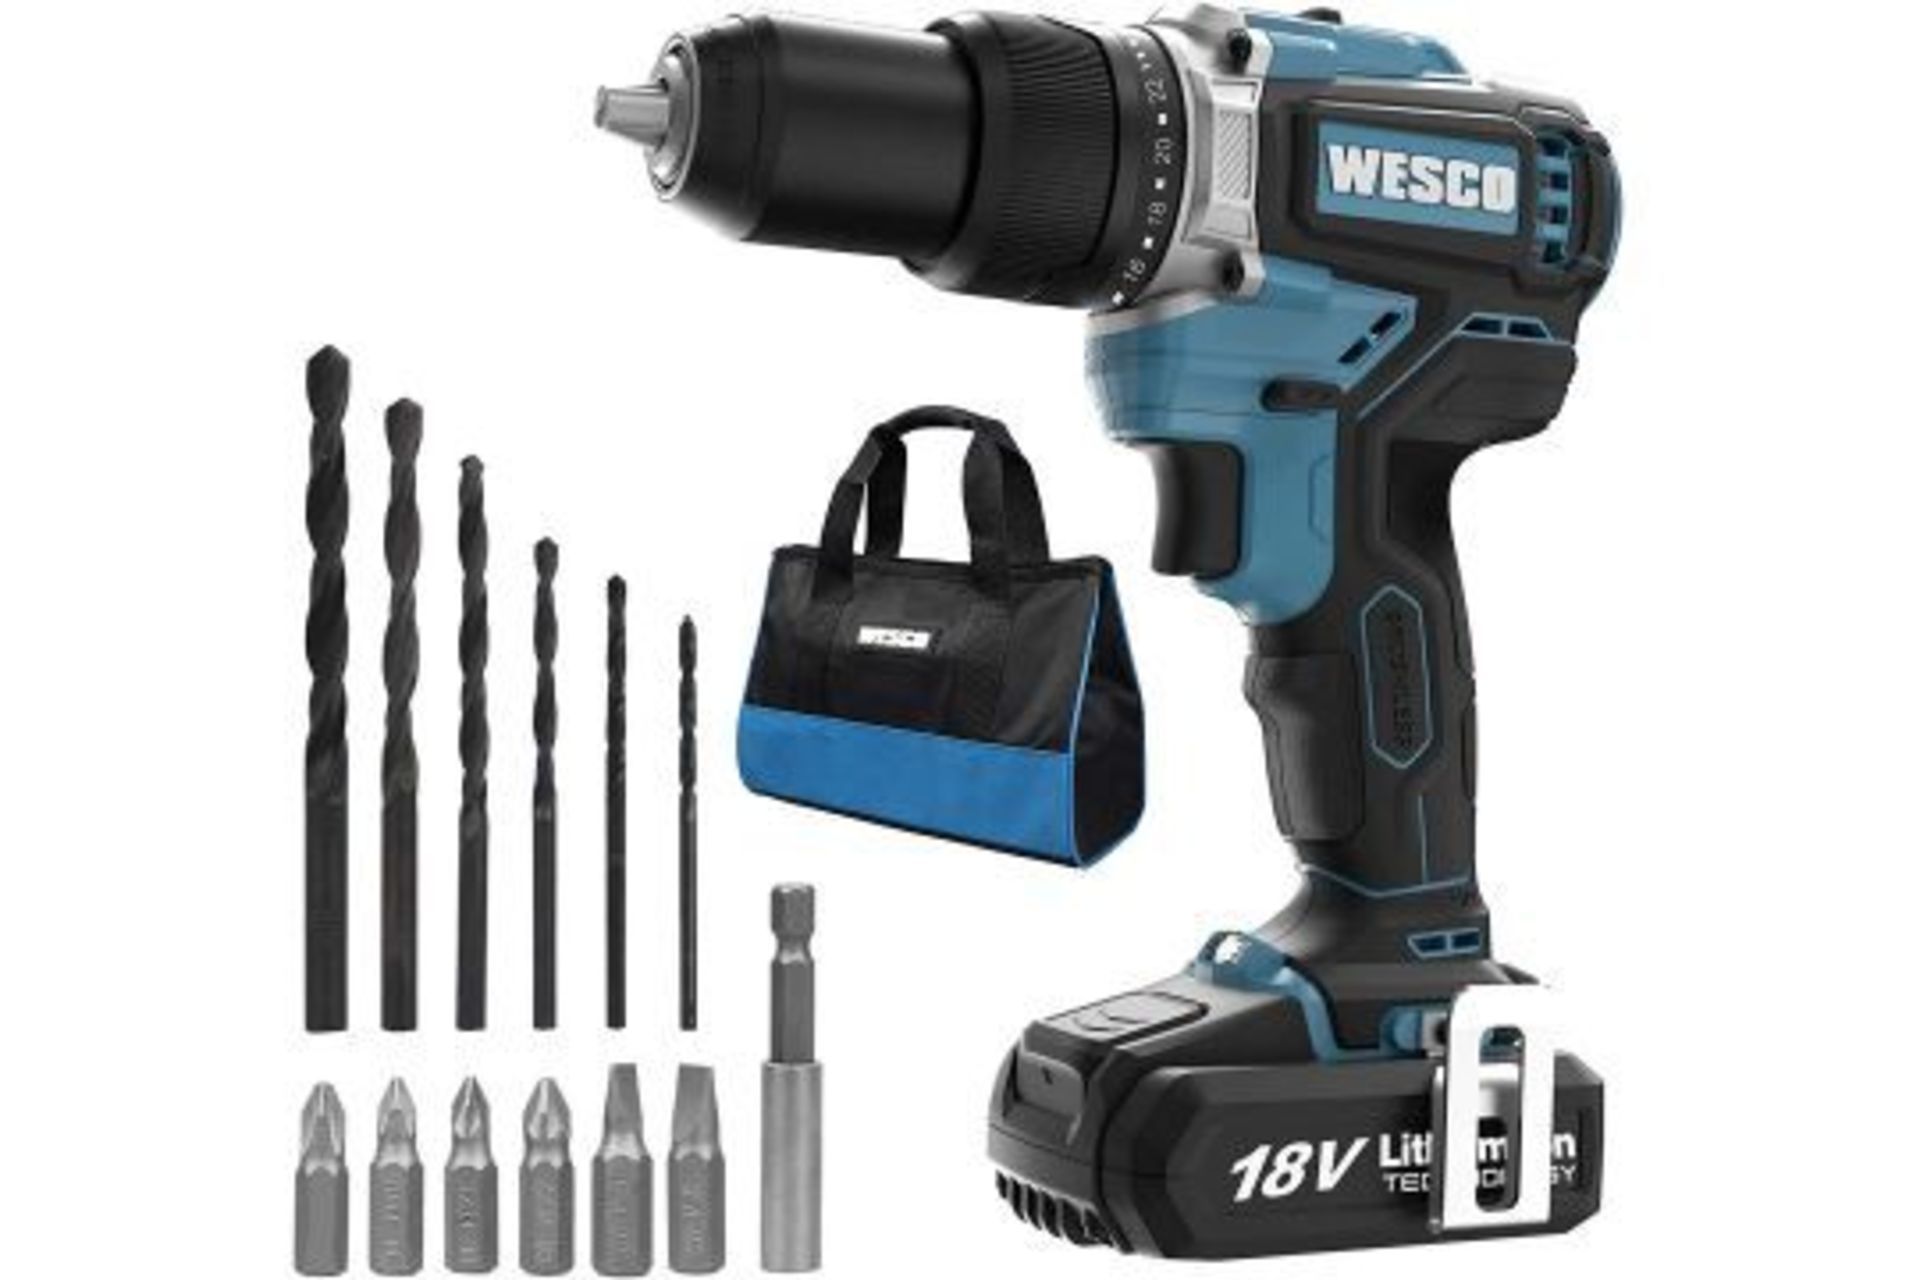 TRADE LOT 8 x New Boxed WESCO 18V 2.0Ah Cordless Combi Drill with 13 Accessories, Hammer Drill Max